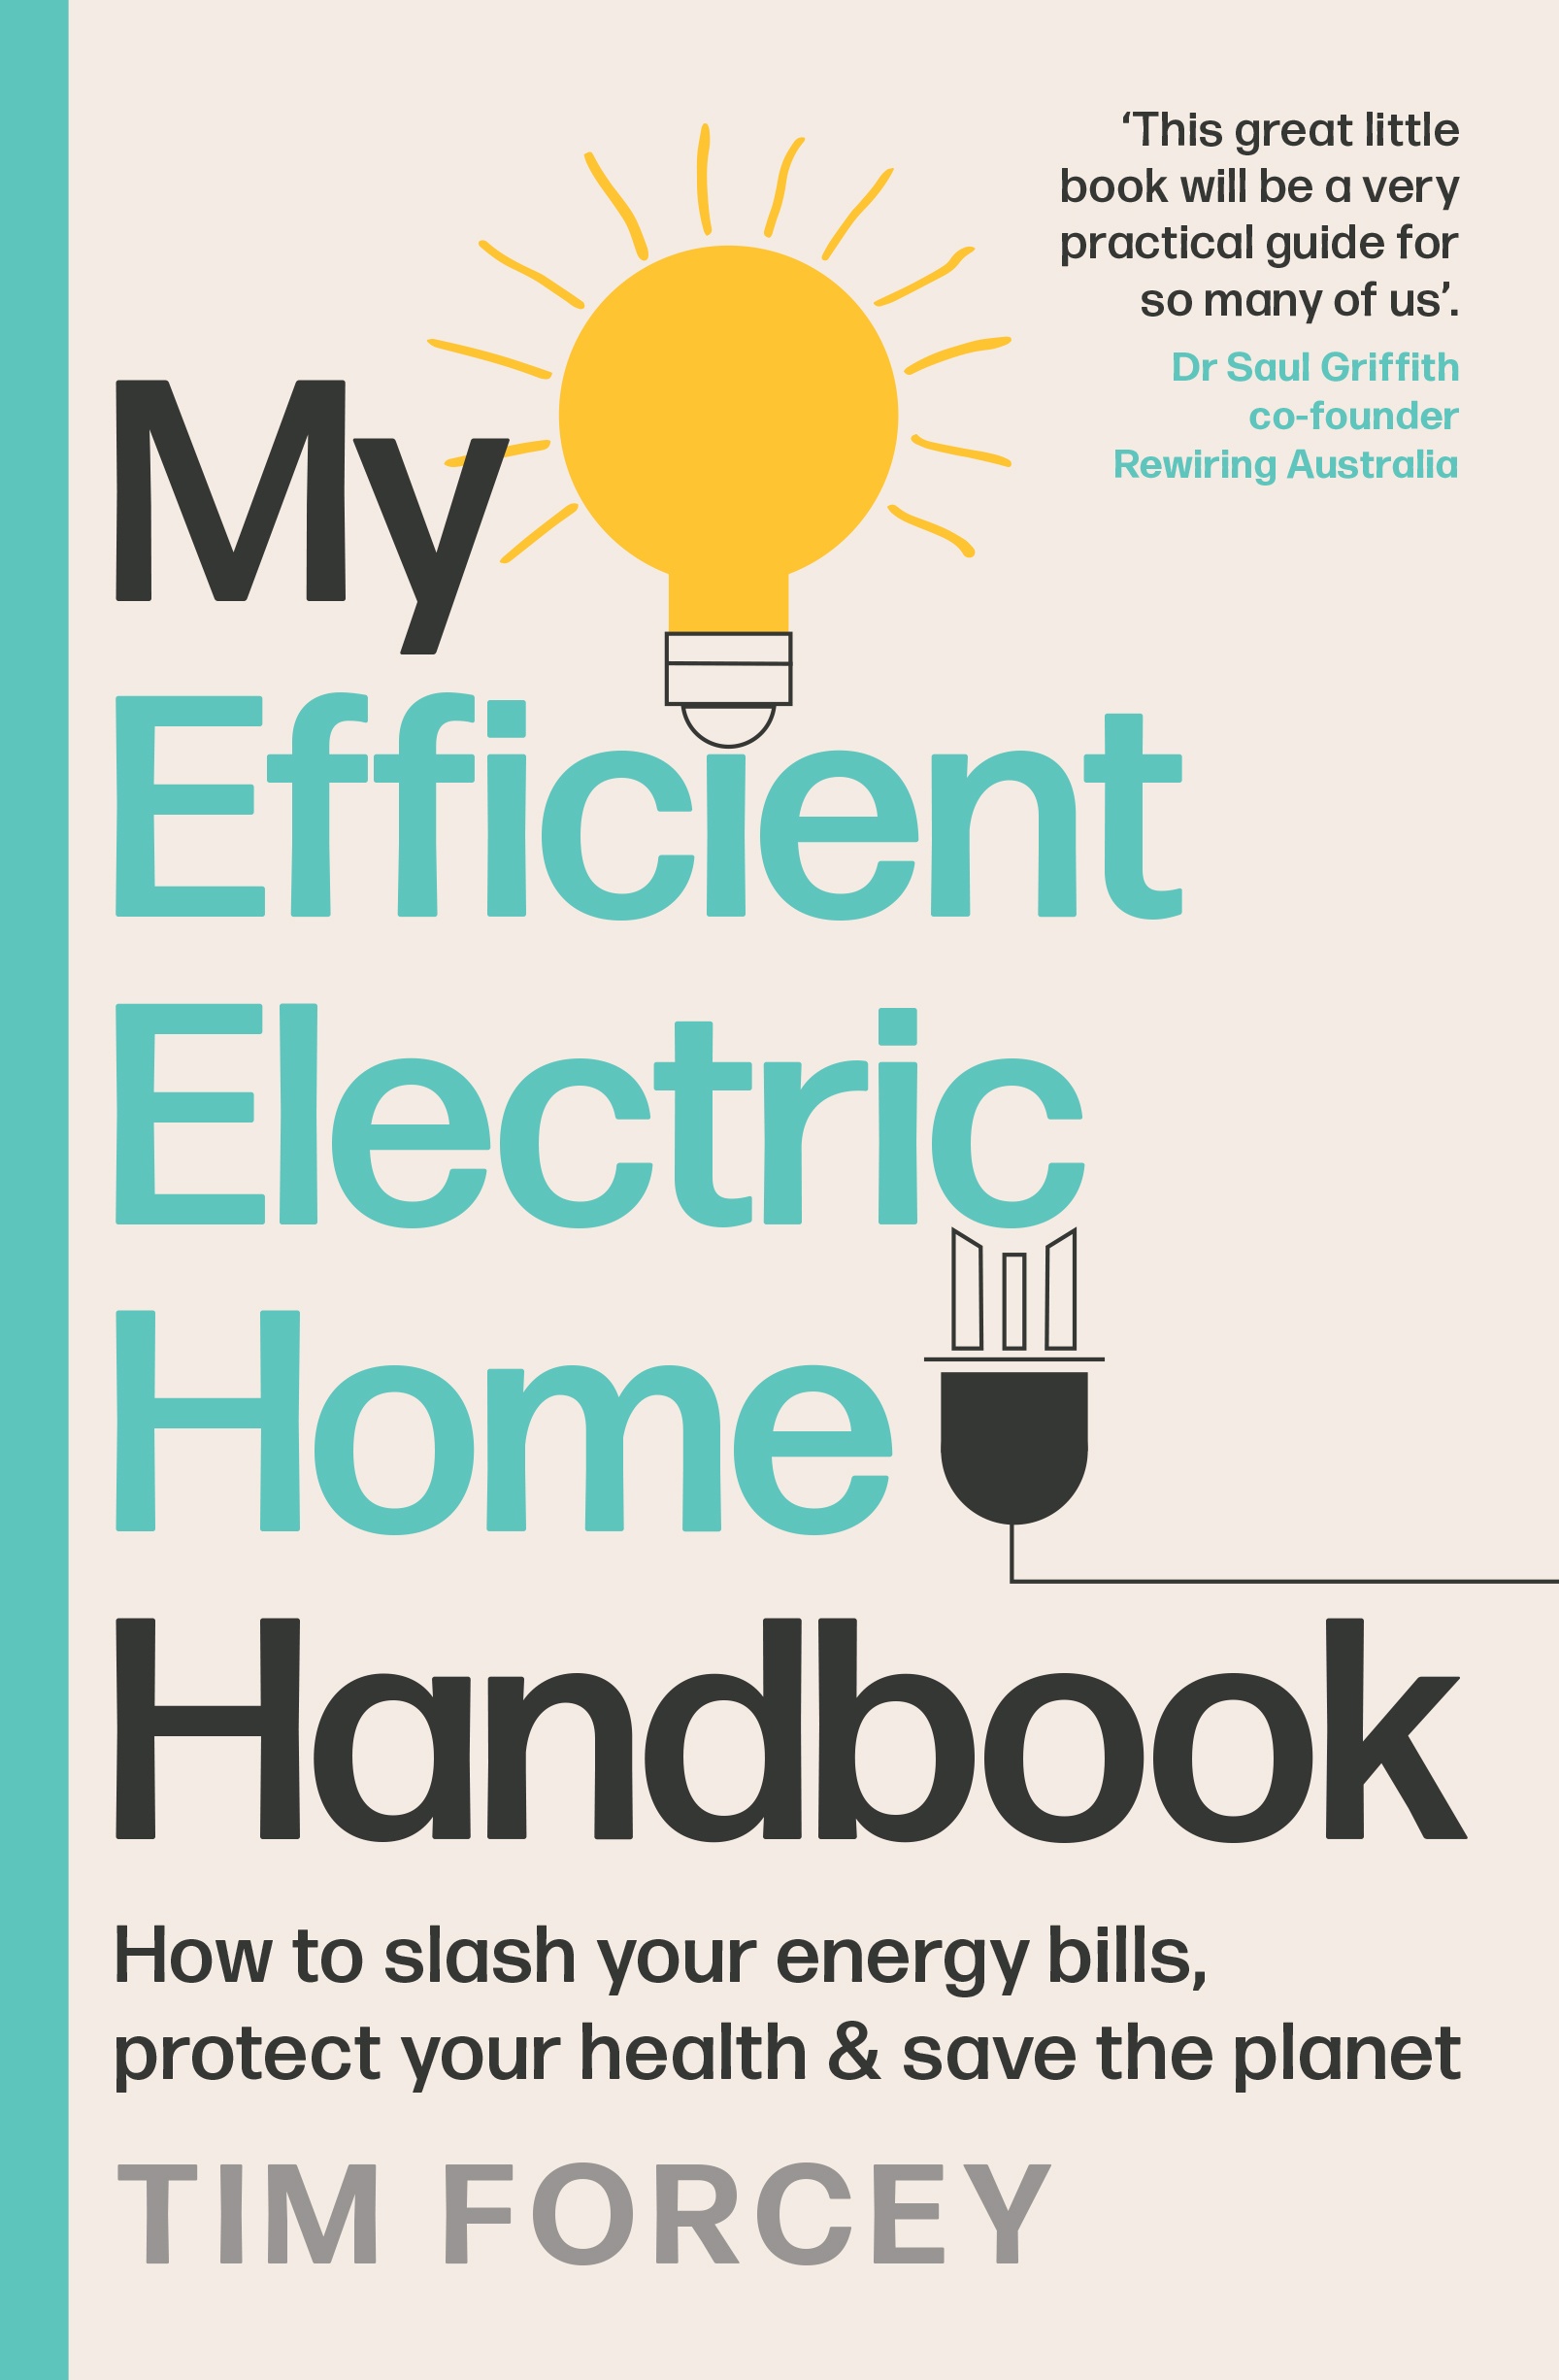 Book cover for 'My Efficient Electric Home Handbook'.